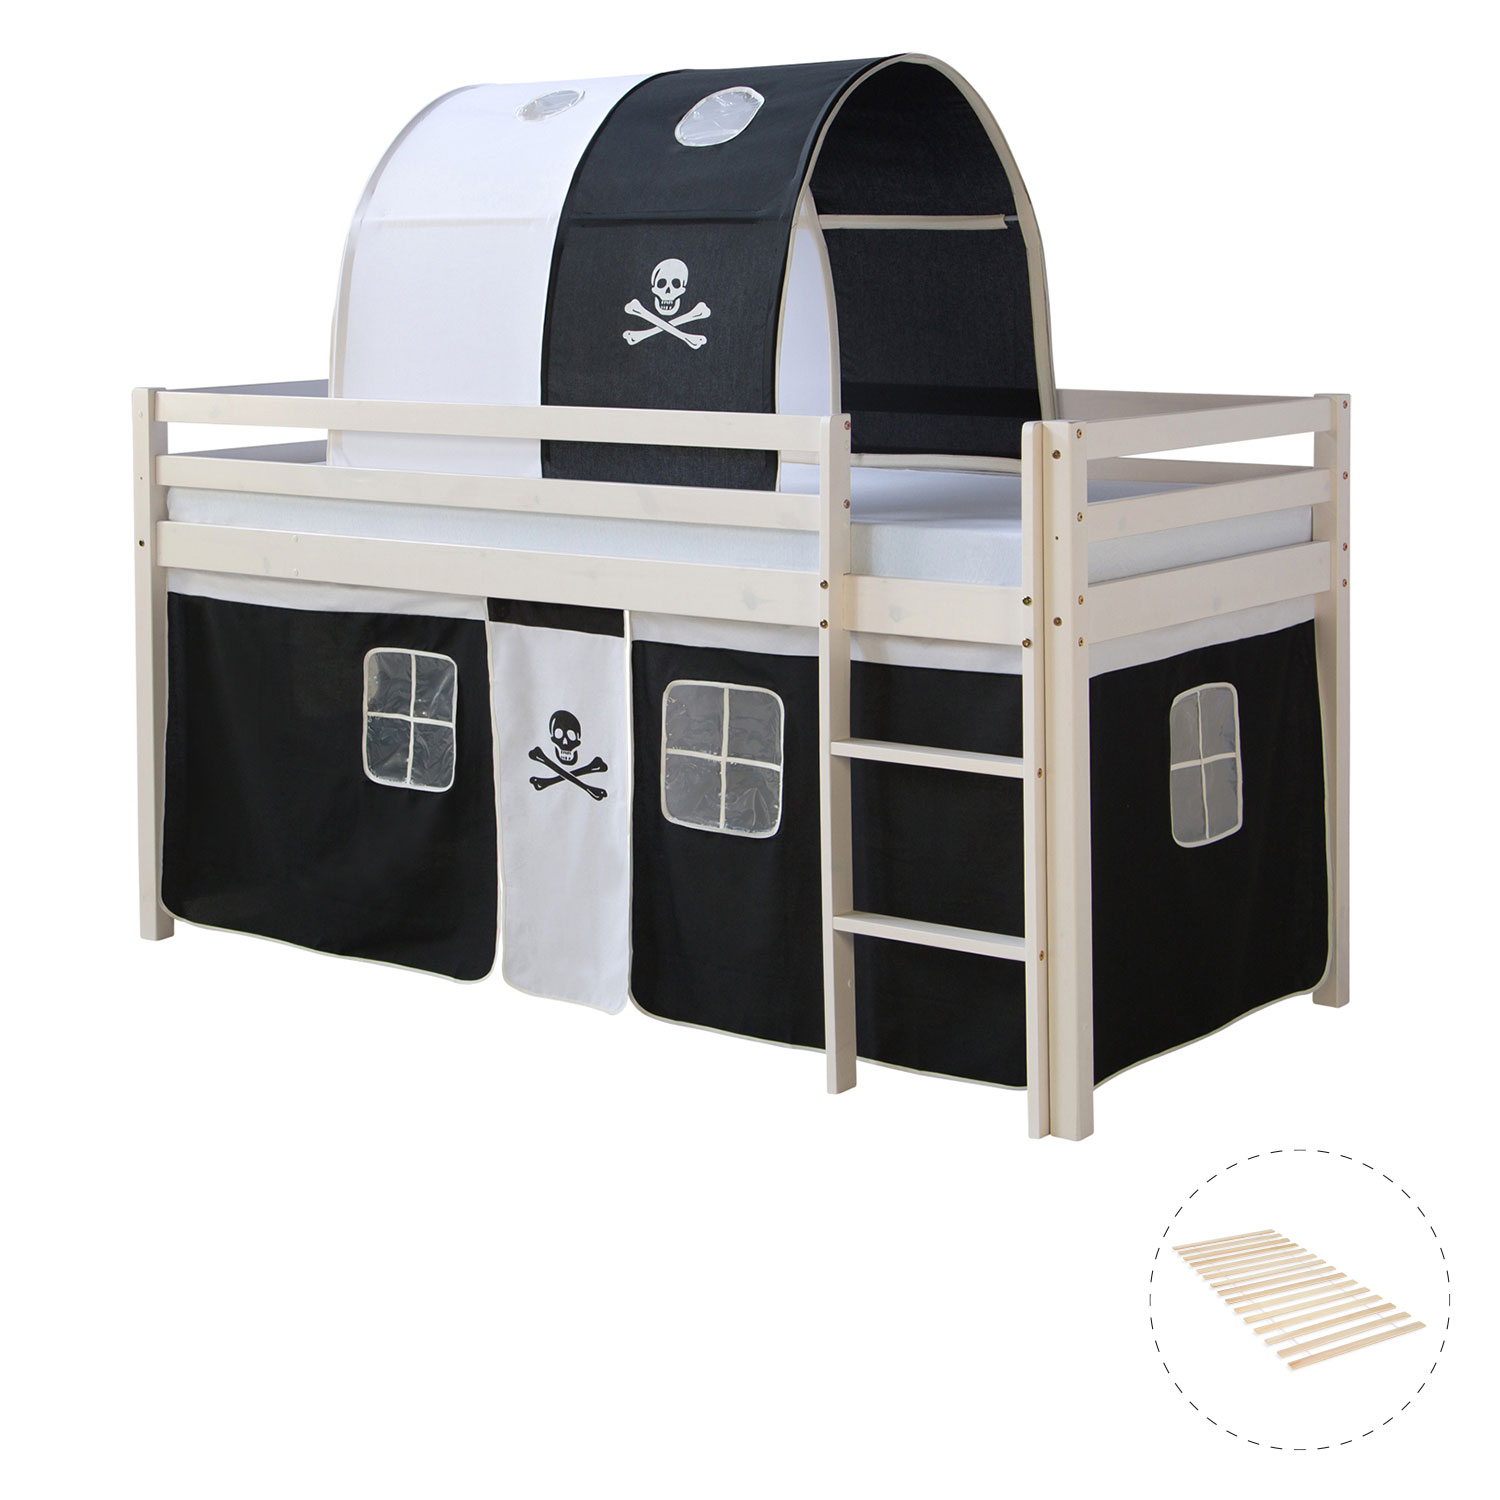 Loftbed 90x200 cm with Slats Bunk bed Childrens bed Tunnel Curtain Black Pirate Solid Pine Wood